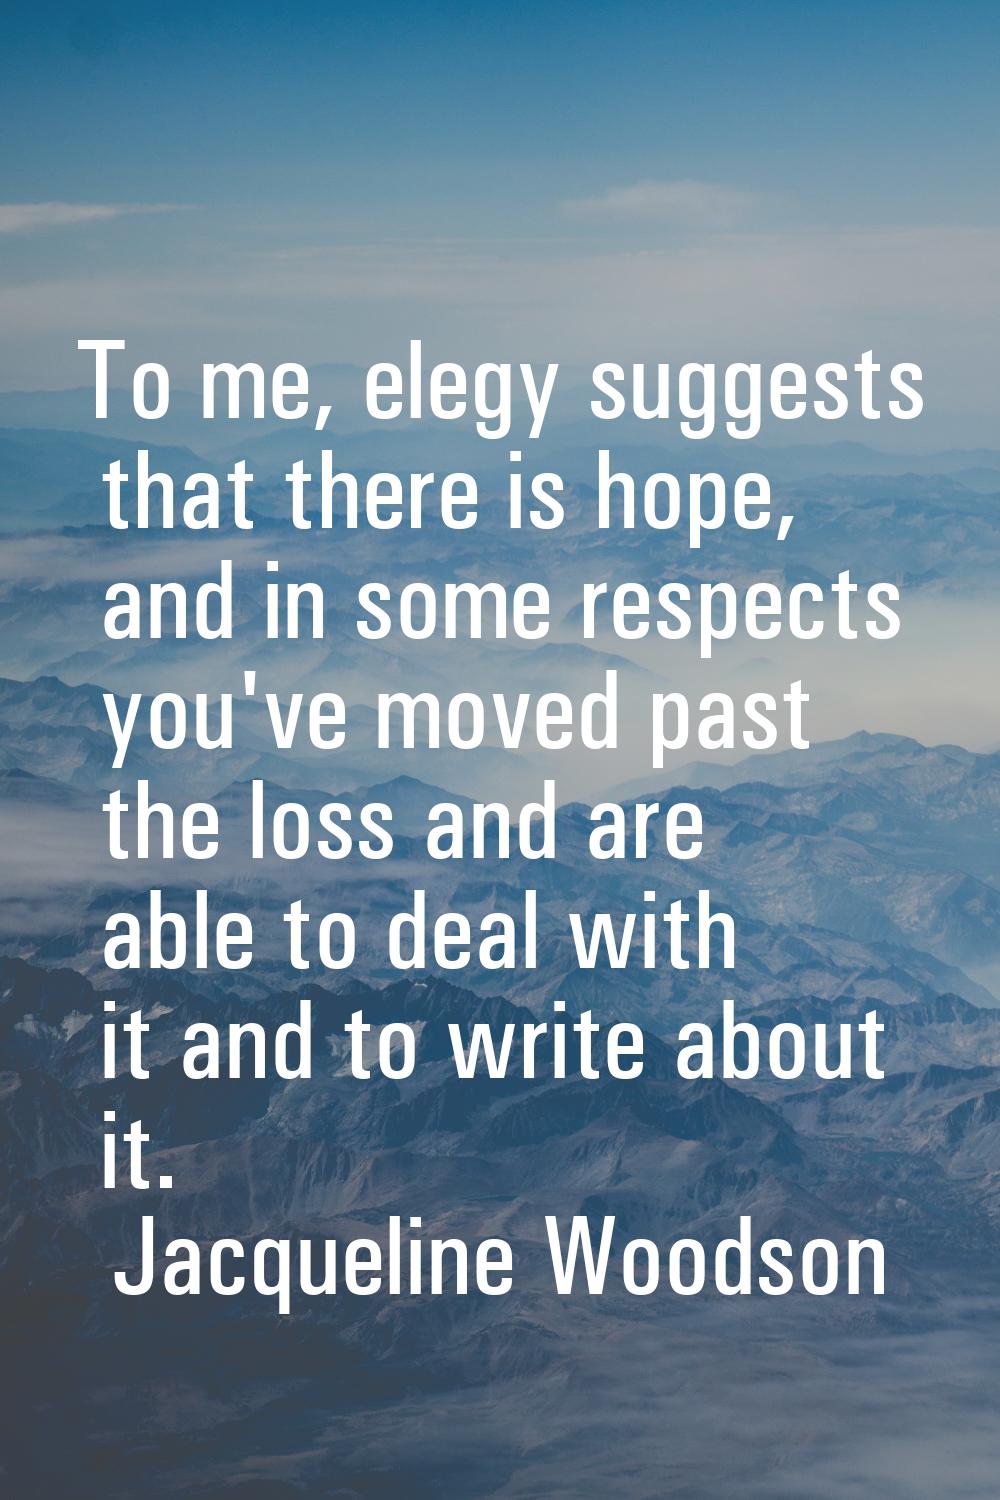 To me, elegy suggests that there is hope, and in some respects you've moved past the loss and are a